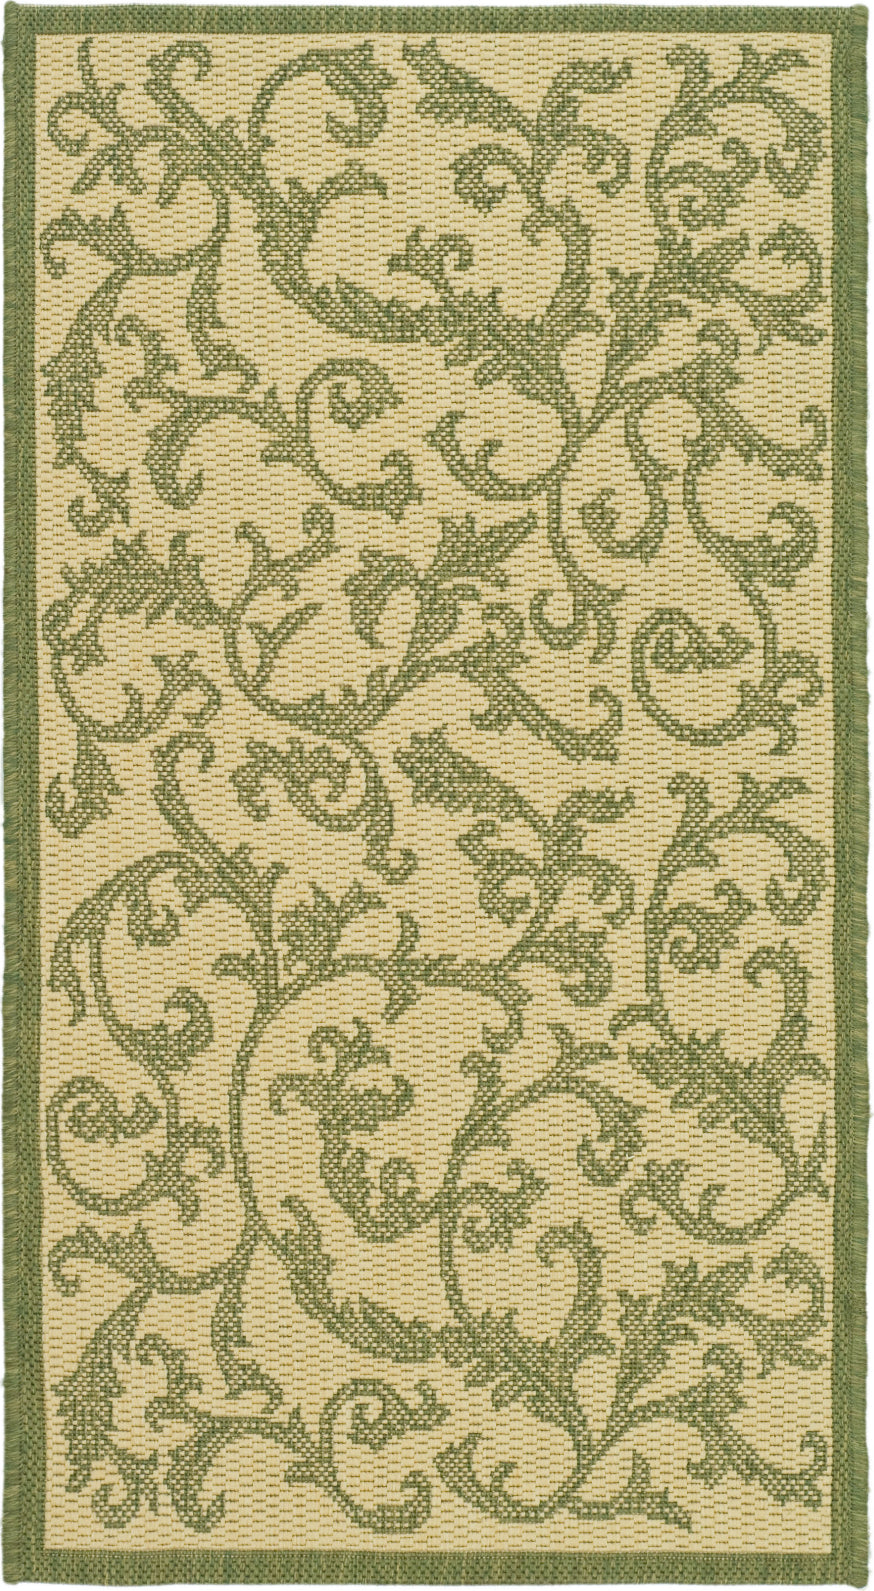 Safavieh Courtyard CY2653 Natural/Olive Area Rug main image